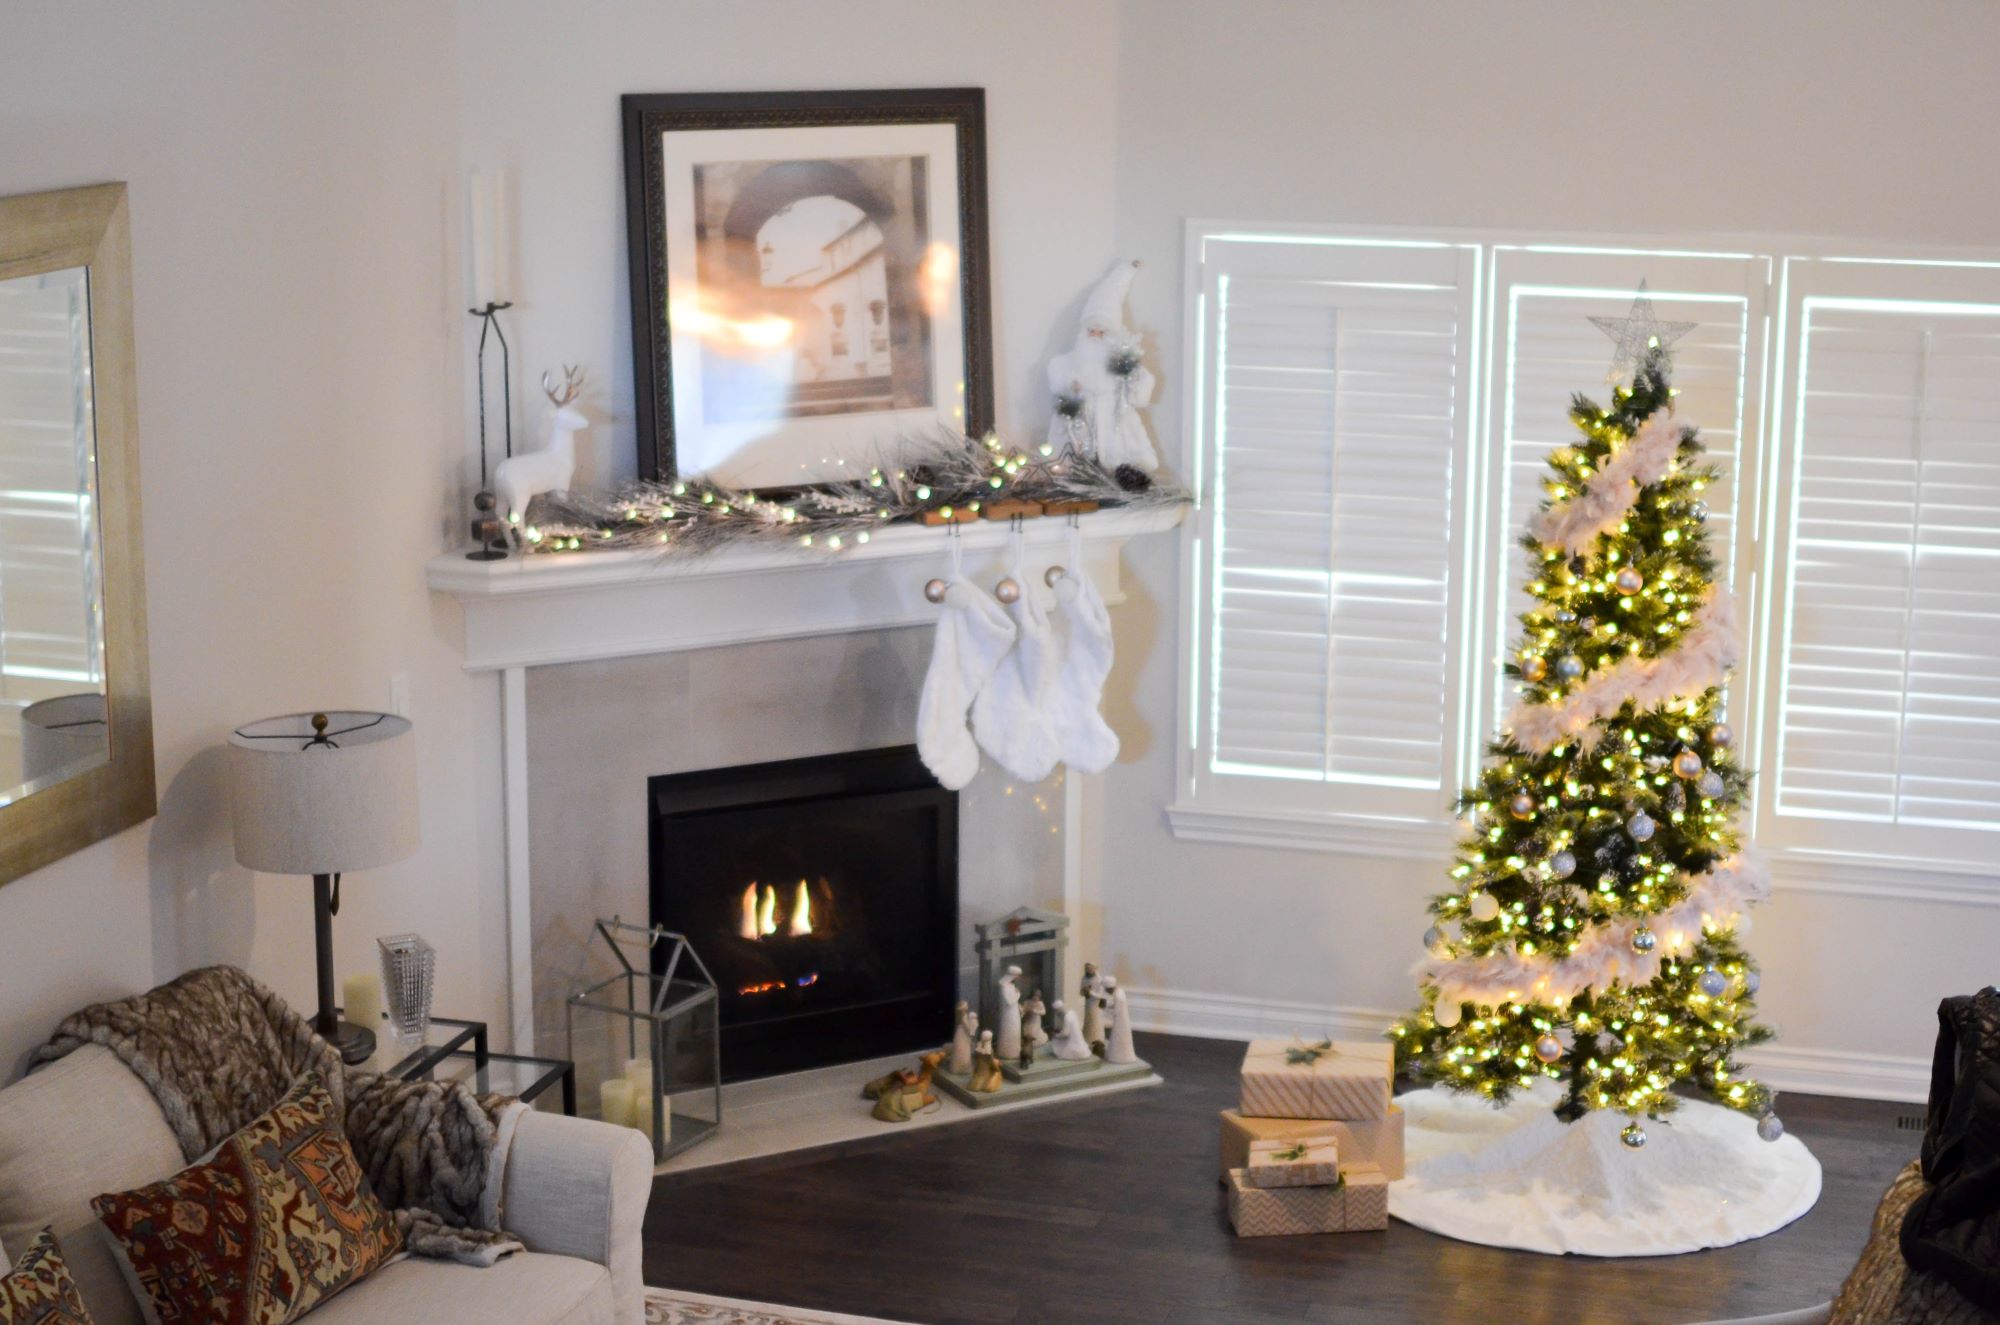 Get Ready for Christmas? Decorate Your Home with Shutterfly